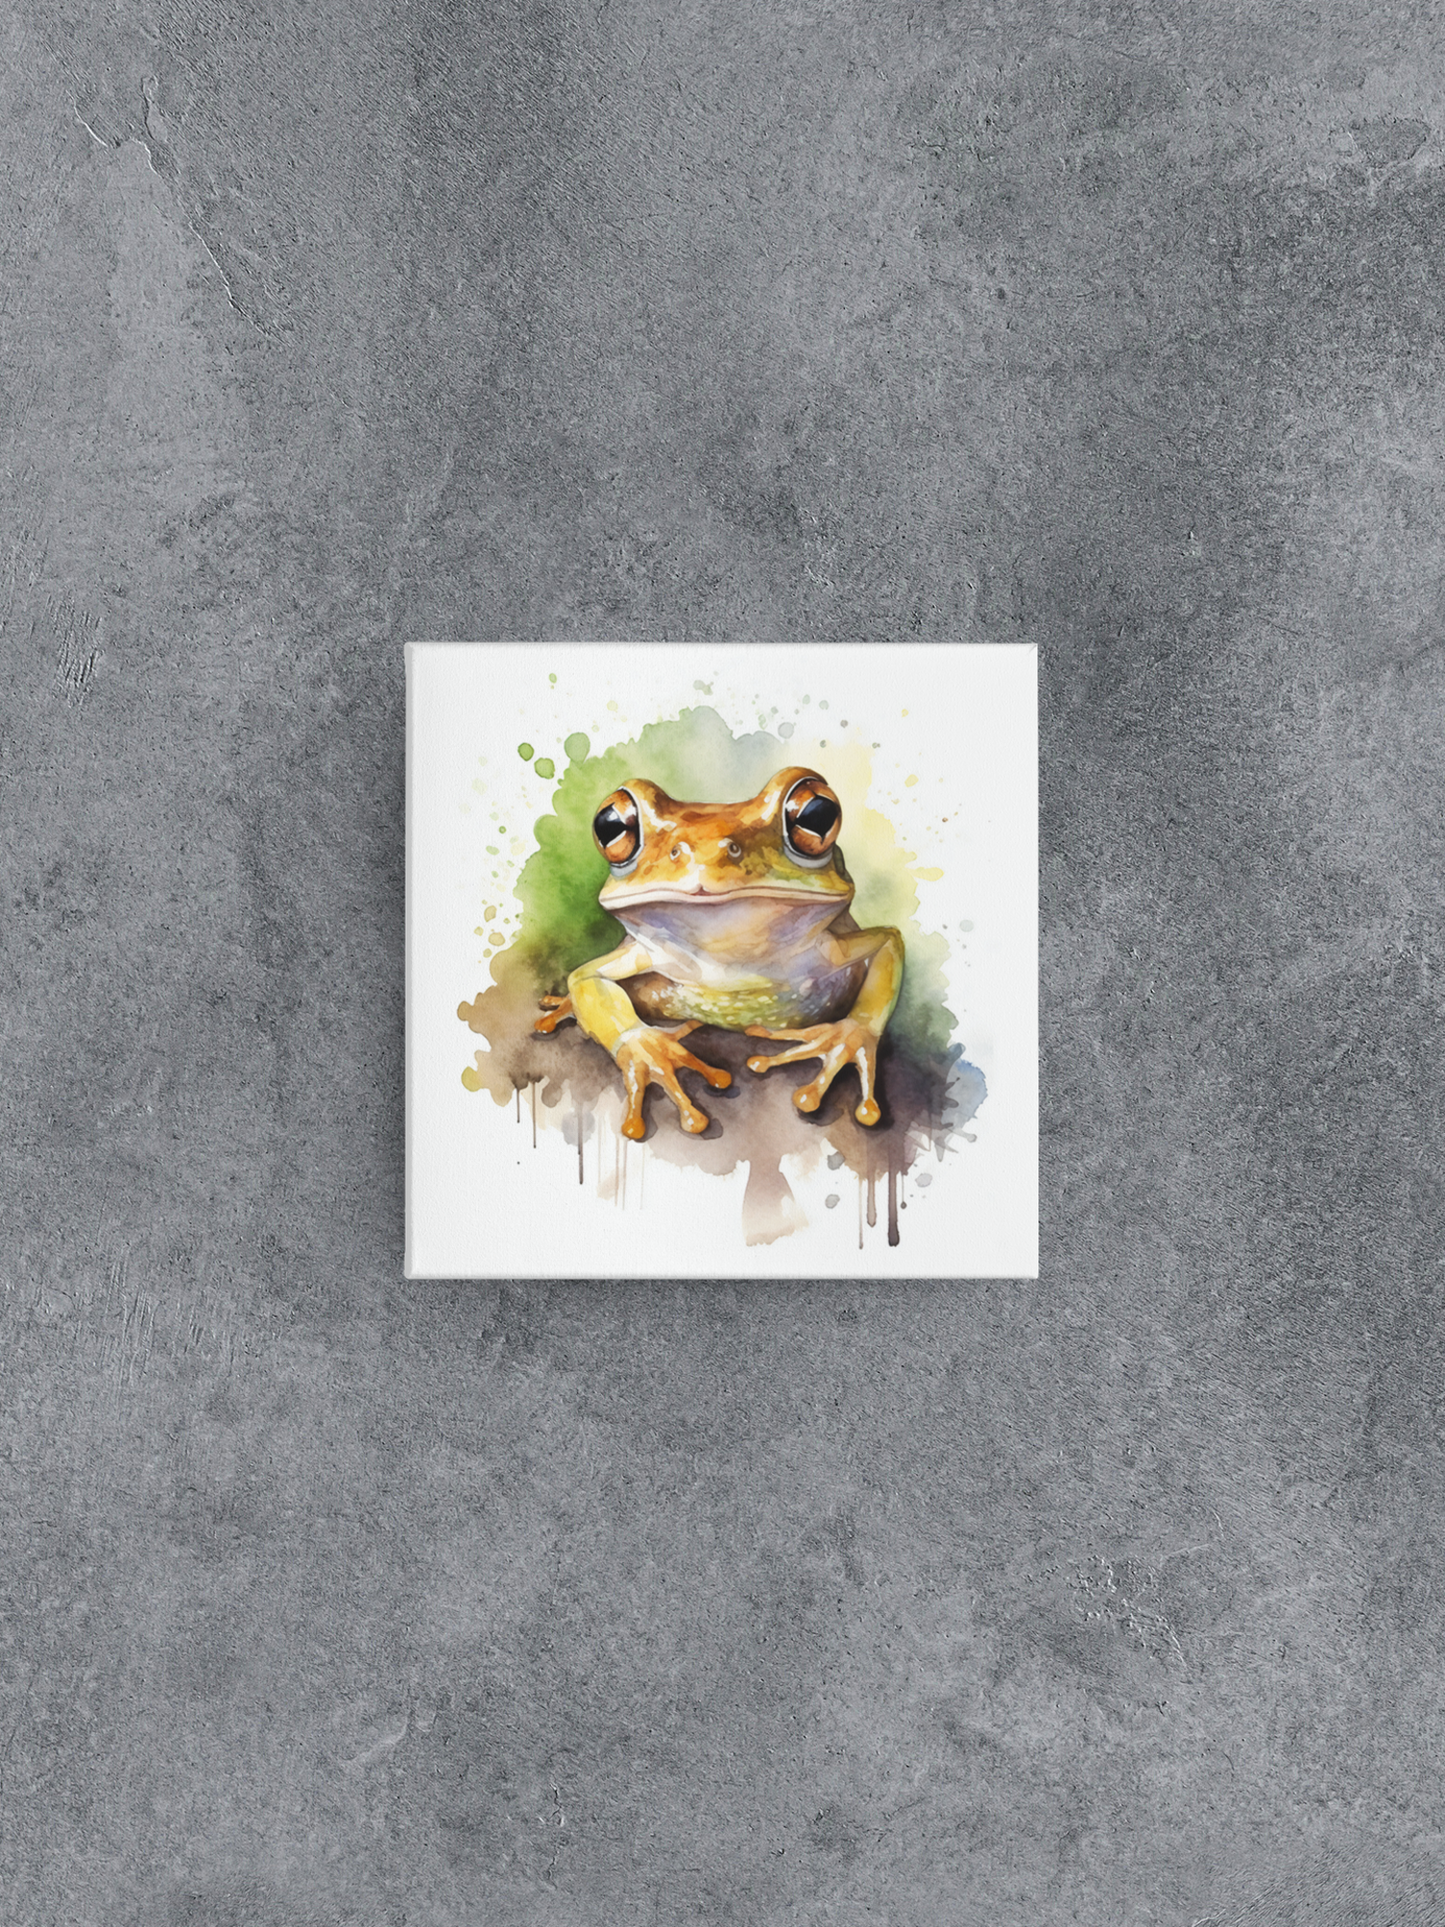 Tree Frog Canvas Wall Art, Watercolor Frog Painting, Animal Canvas Print, Nature Stretch Canvas Art